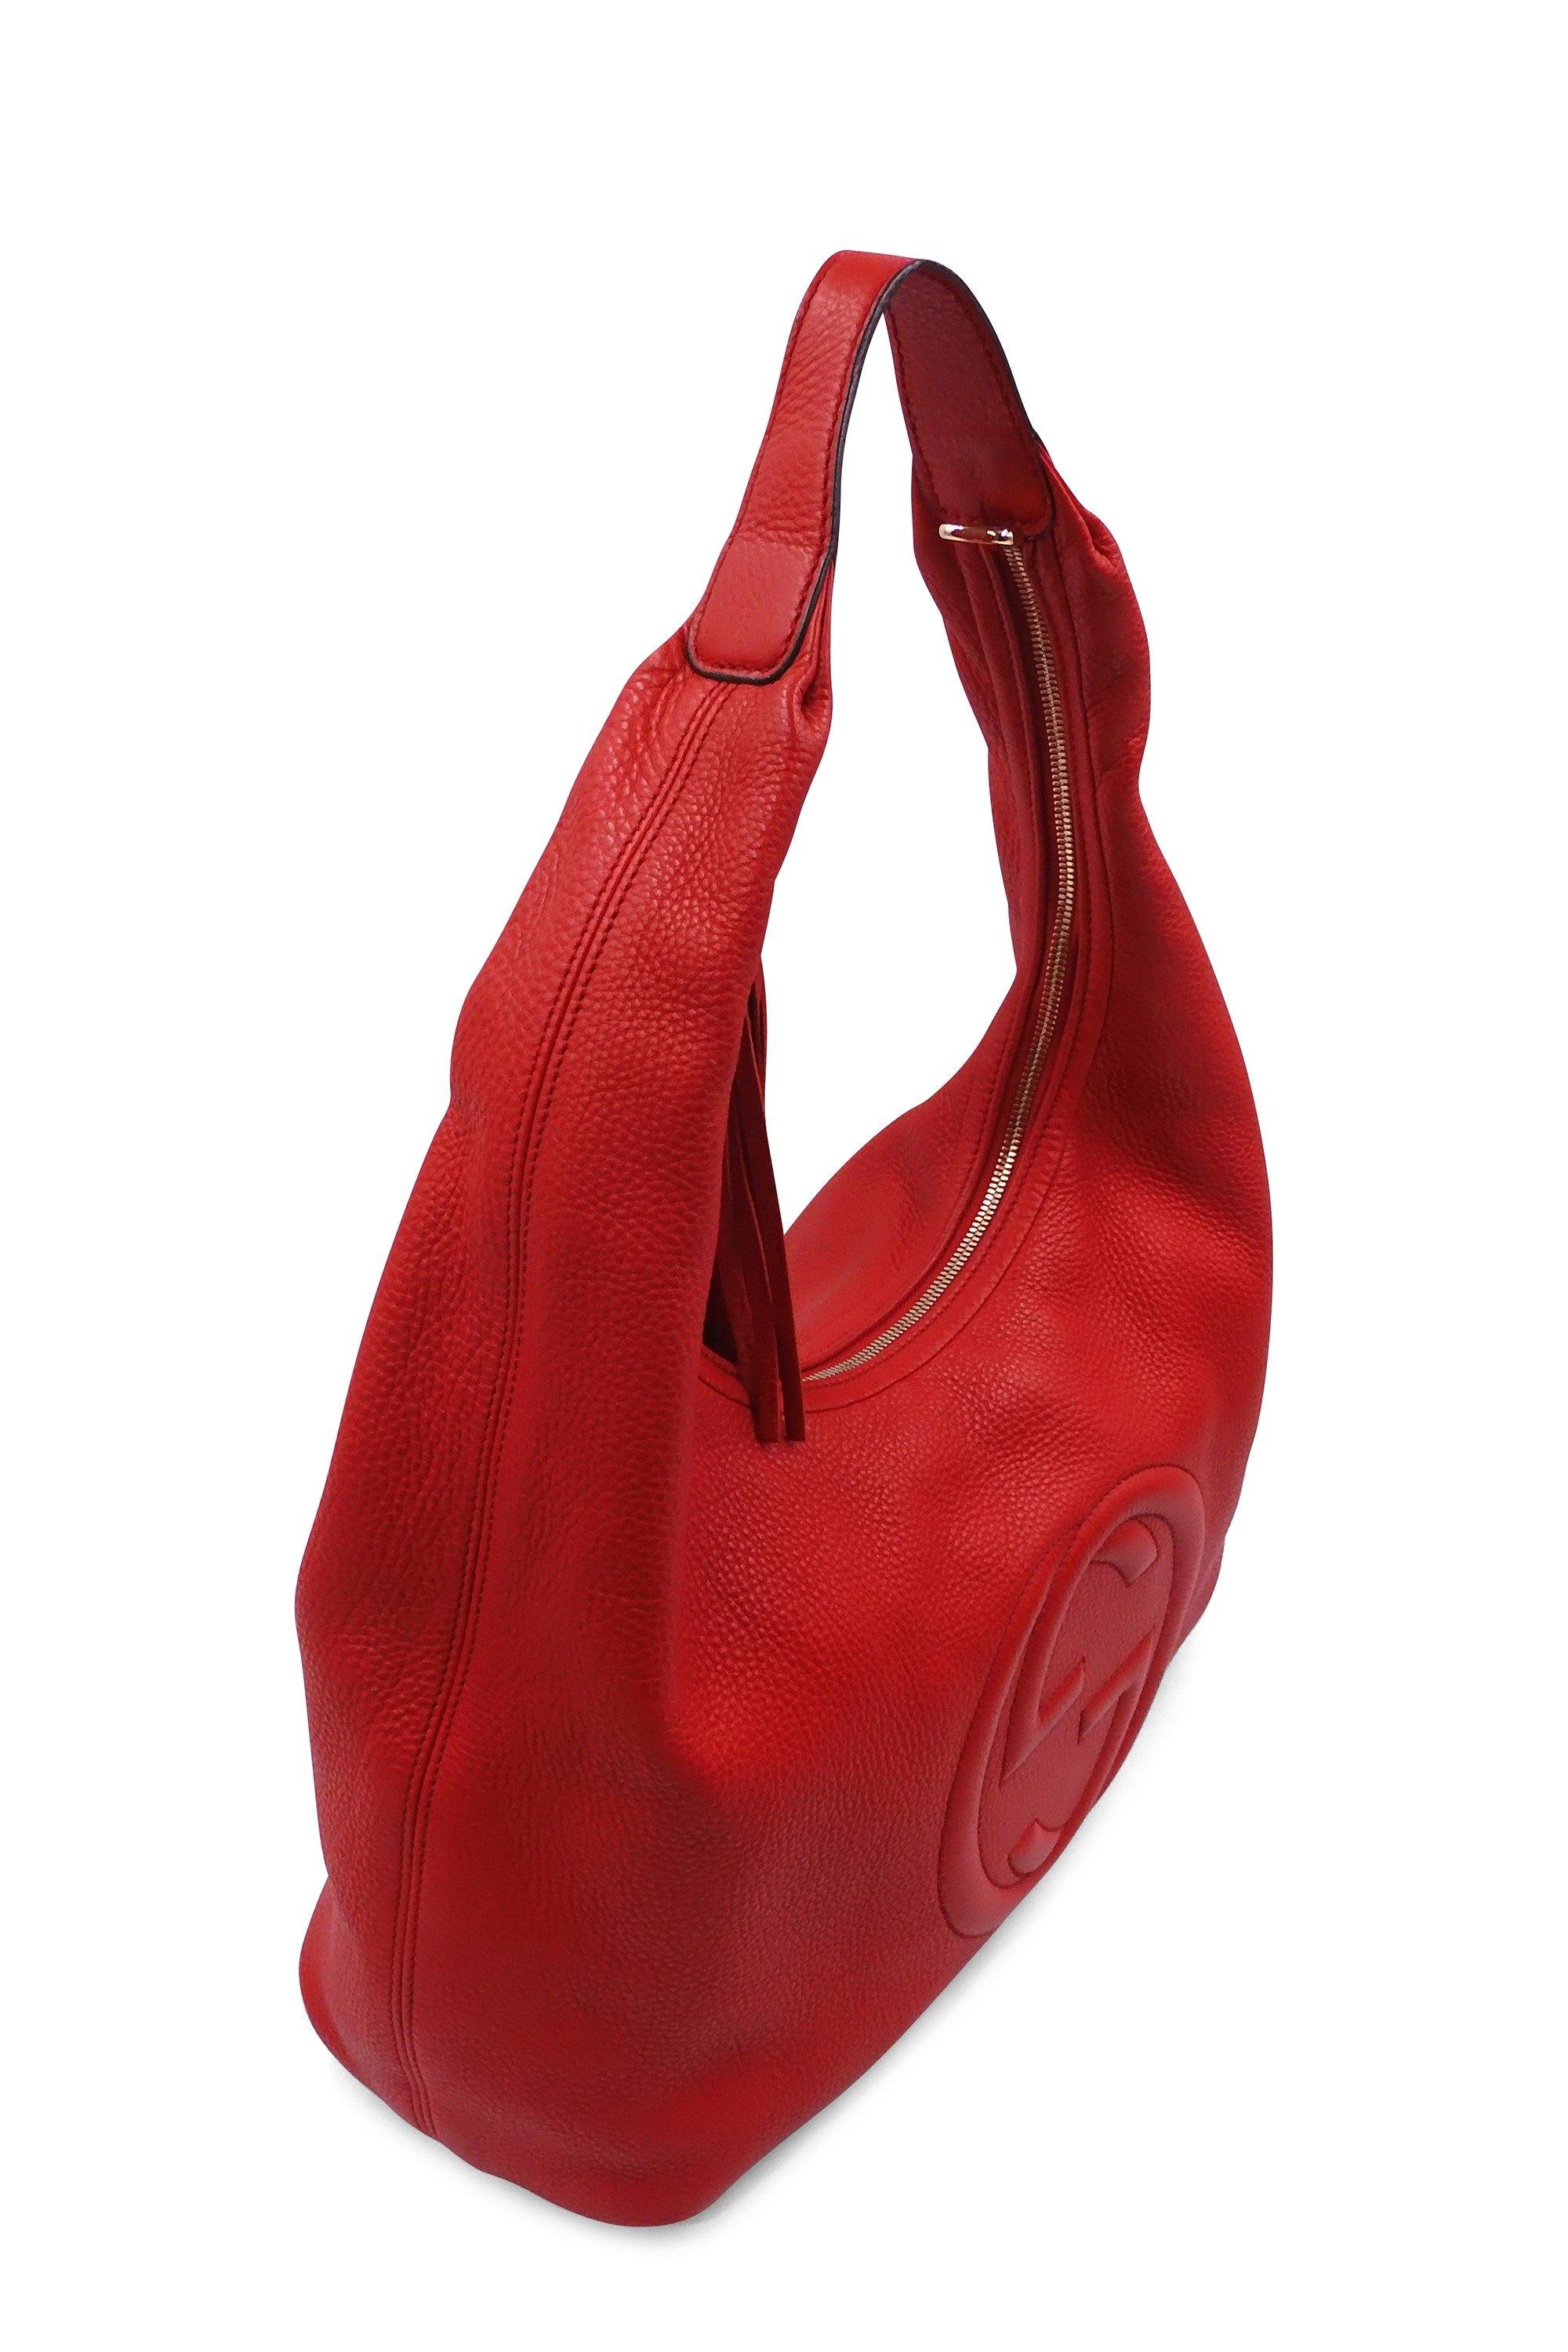  Gucci Soho Flame Red Leather Bag Soft Hobo Italy